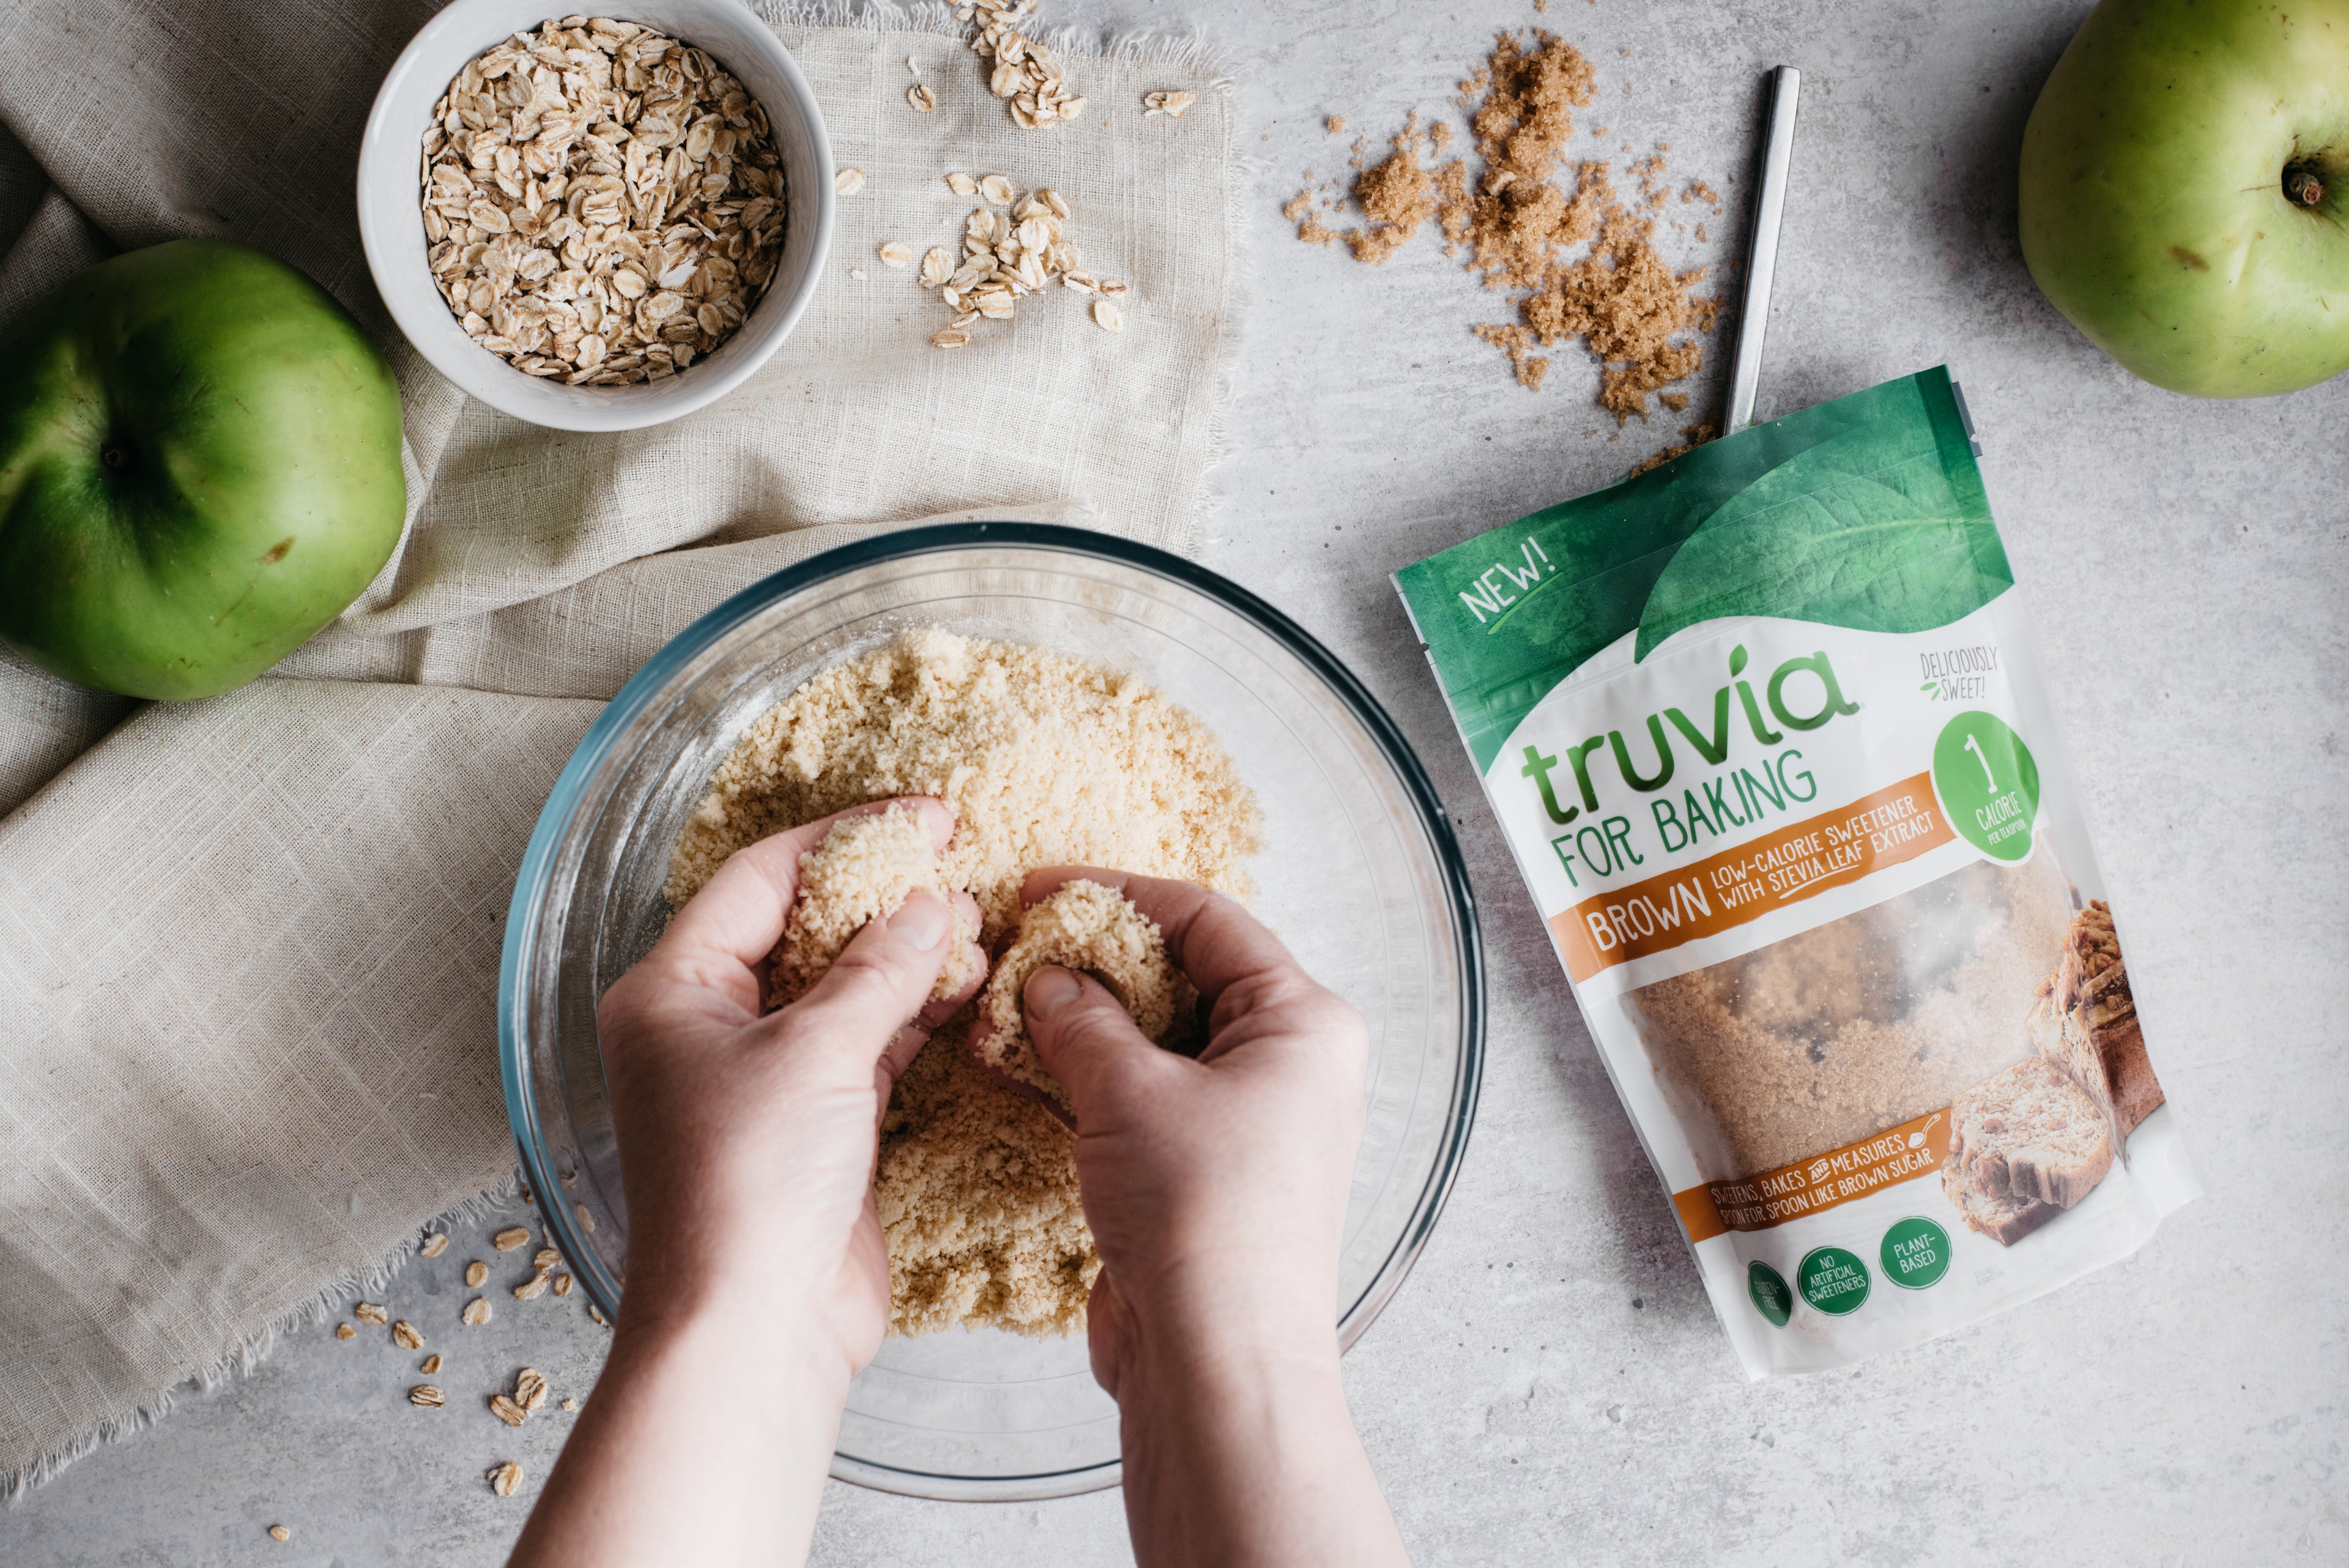 Hands crumbling Mini Apple & Cinnamon Crumble into a bowl, next to a bag of Truvia for Baking Brown.